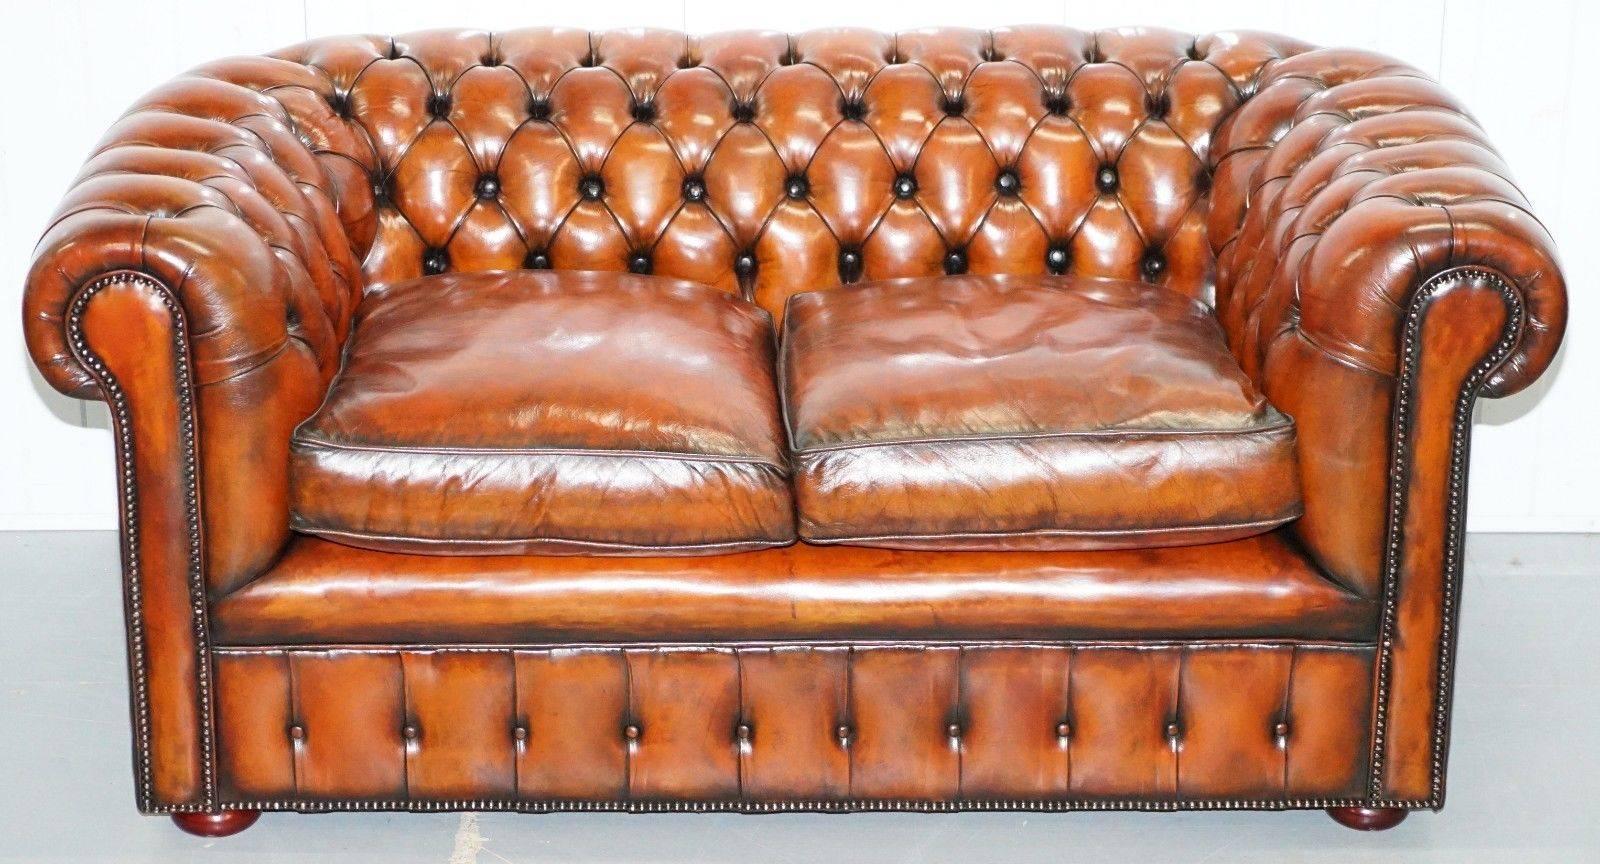 We are delighted to offer for sale this very rare absolutely stunning circa 1930's fully restored Chesterfield aged whiskey brown leather gentleman’s club sofa with very comfortable feather filled seat cushions

Where to begin, if you’re looking